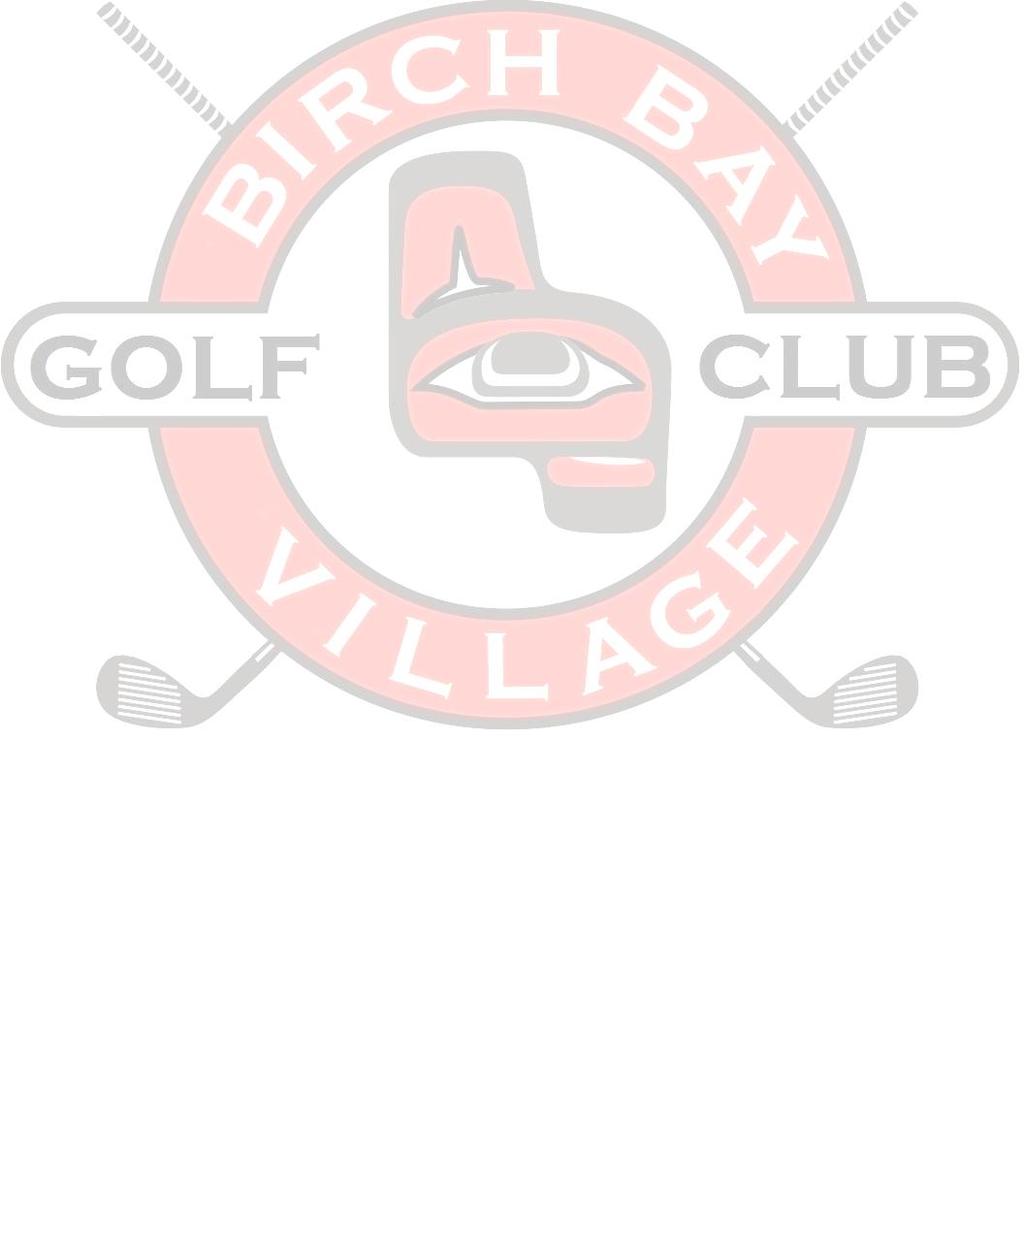 GENERAL: BIRCH BAY VILLAGE GOLF CLUB RULES OF PLAY a. Maintain a steady pace of play - target 90 minutes per nine holes. b. Please do not trespass on private property without owner's permission. c.